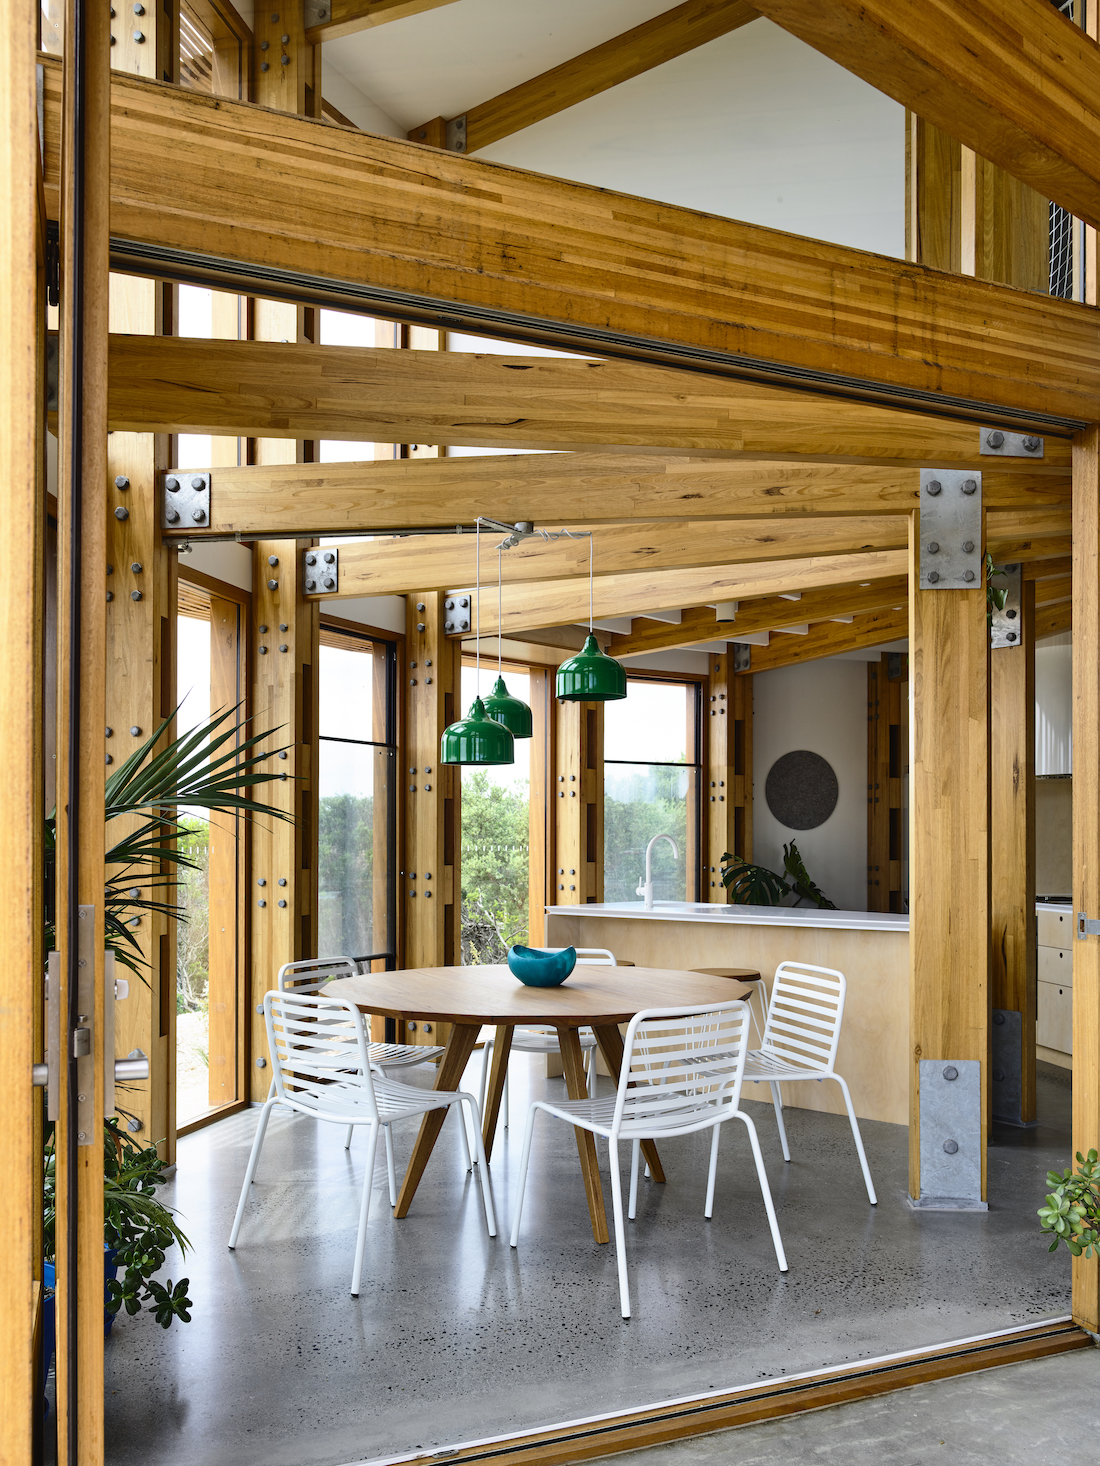 Dining room with exposed beams in round house